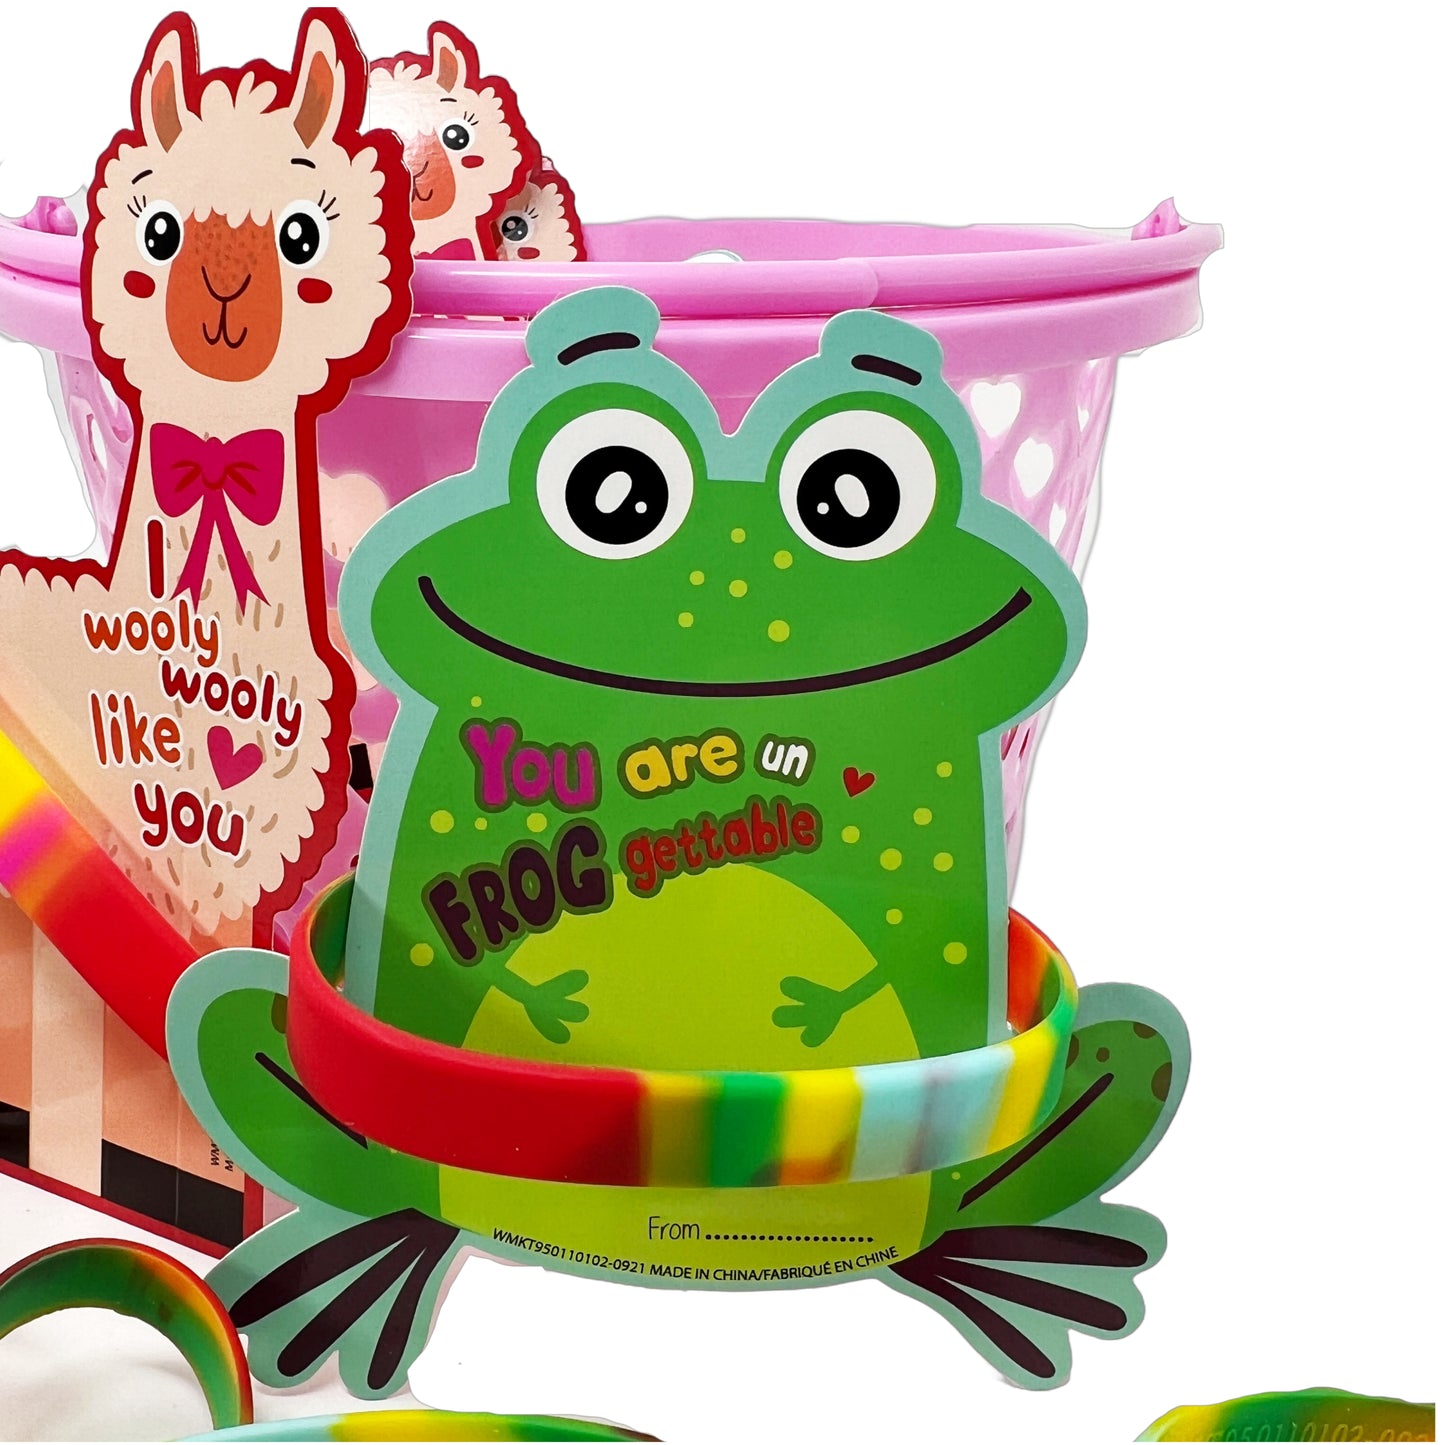 Cheep N Cheerful Valentine Kiddie Card Bucket with Bracelets 16ct, Deluxe Valentine Party Favors and Cards, Kids Valentine